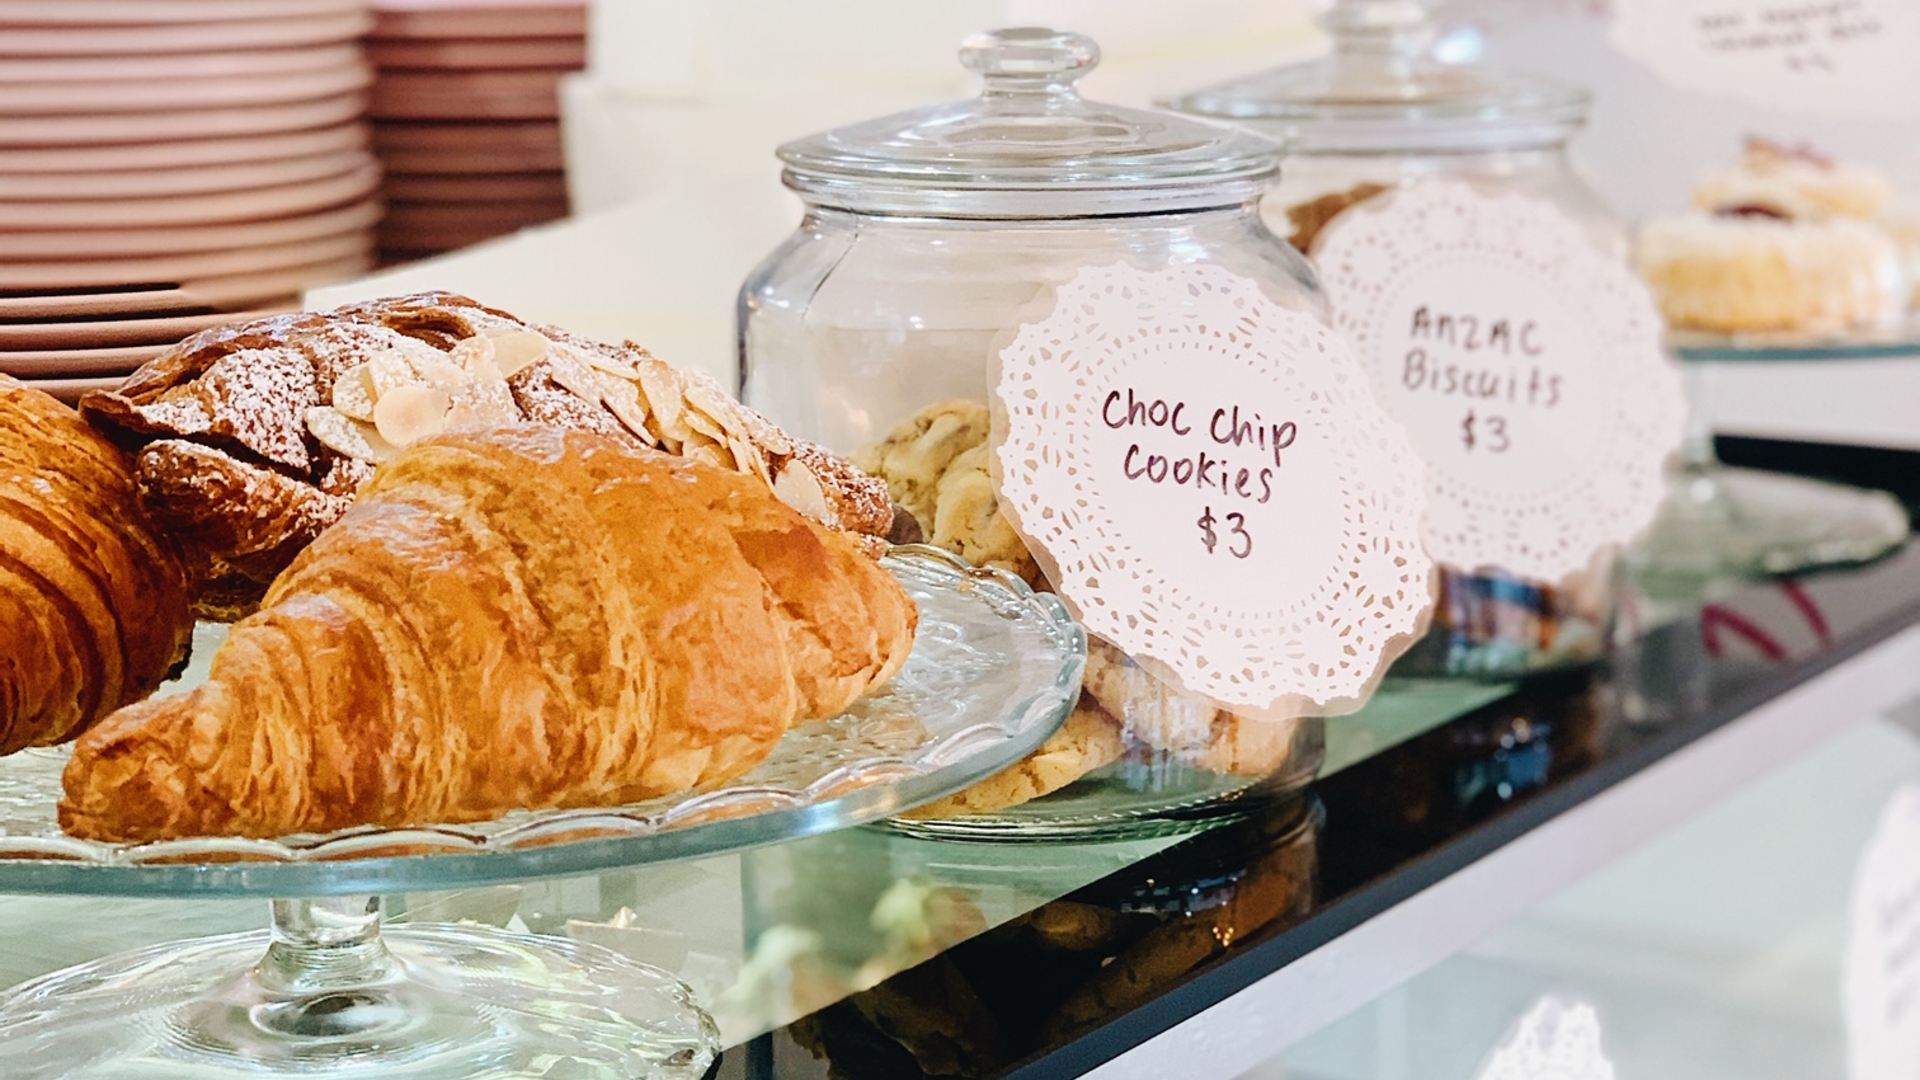 The Sunday Baker Is the New Pastel-Hued Bakery Cafe Taking Over Daisy's Milkbar's Old Digs